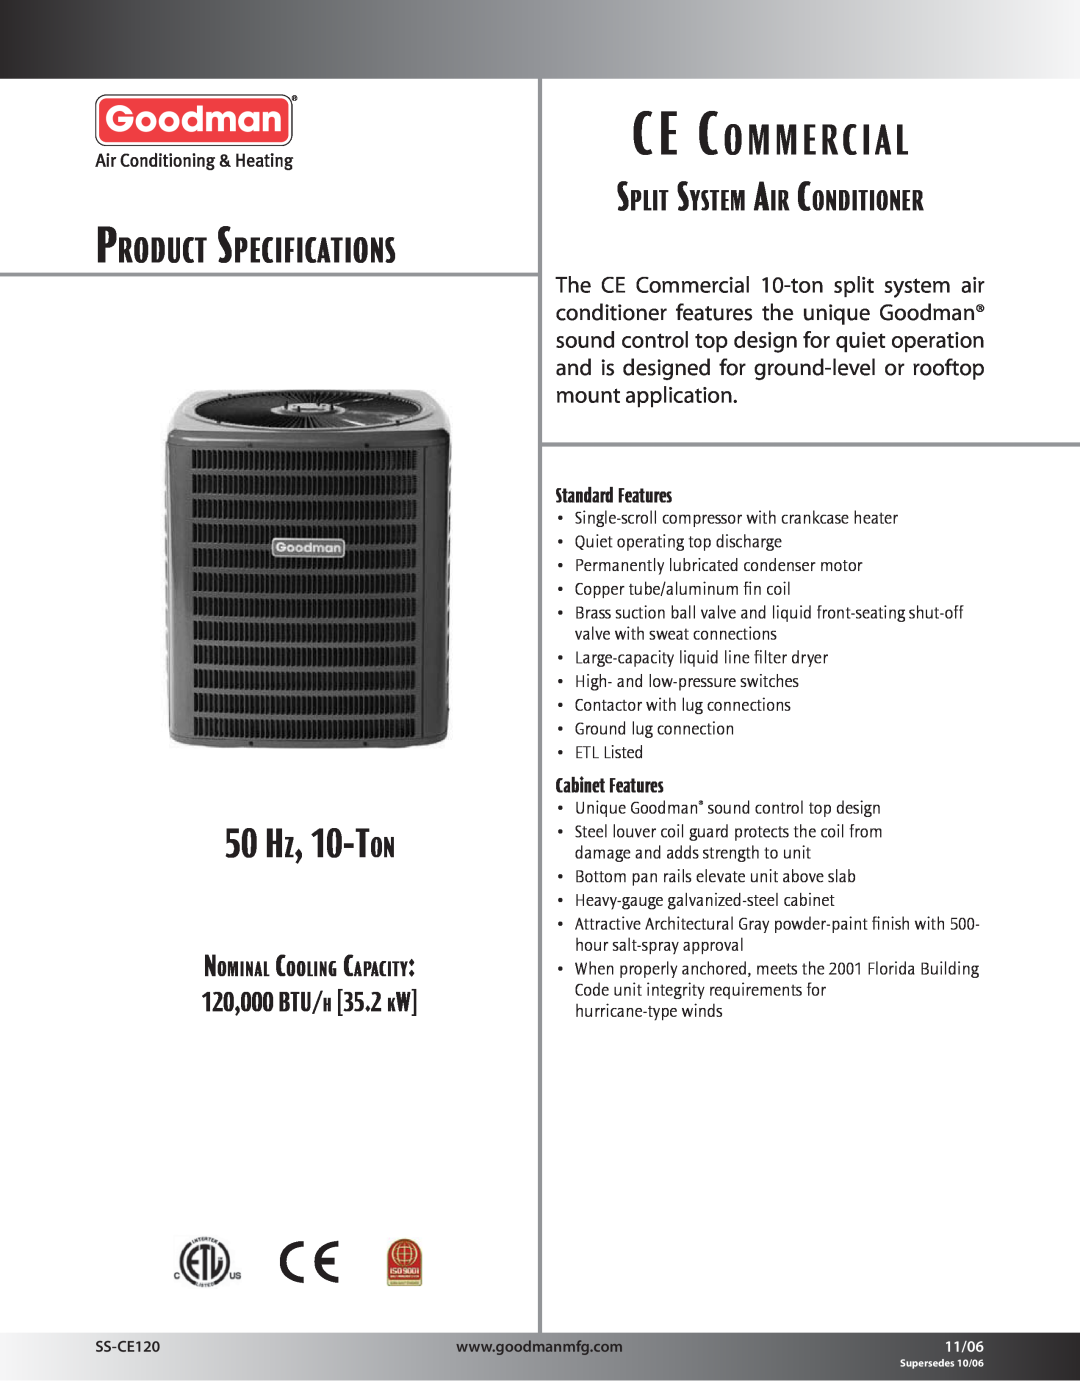 Goodman Mfg CE COMMERCIAL SPLIT SYSTEM AIR CONDITIONER specifications Product Specifications, 120,000 BTU/H 35.2 KW 